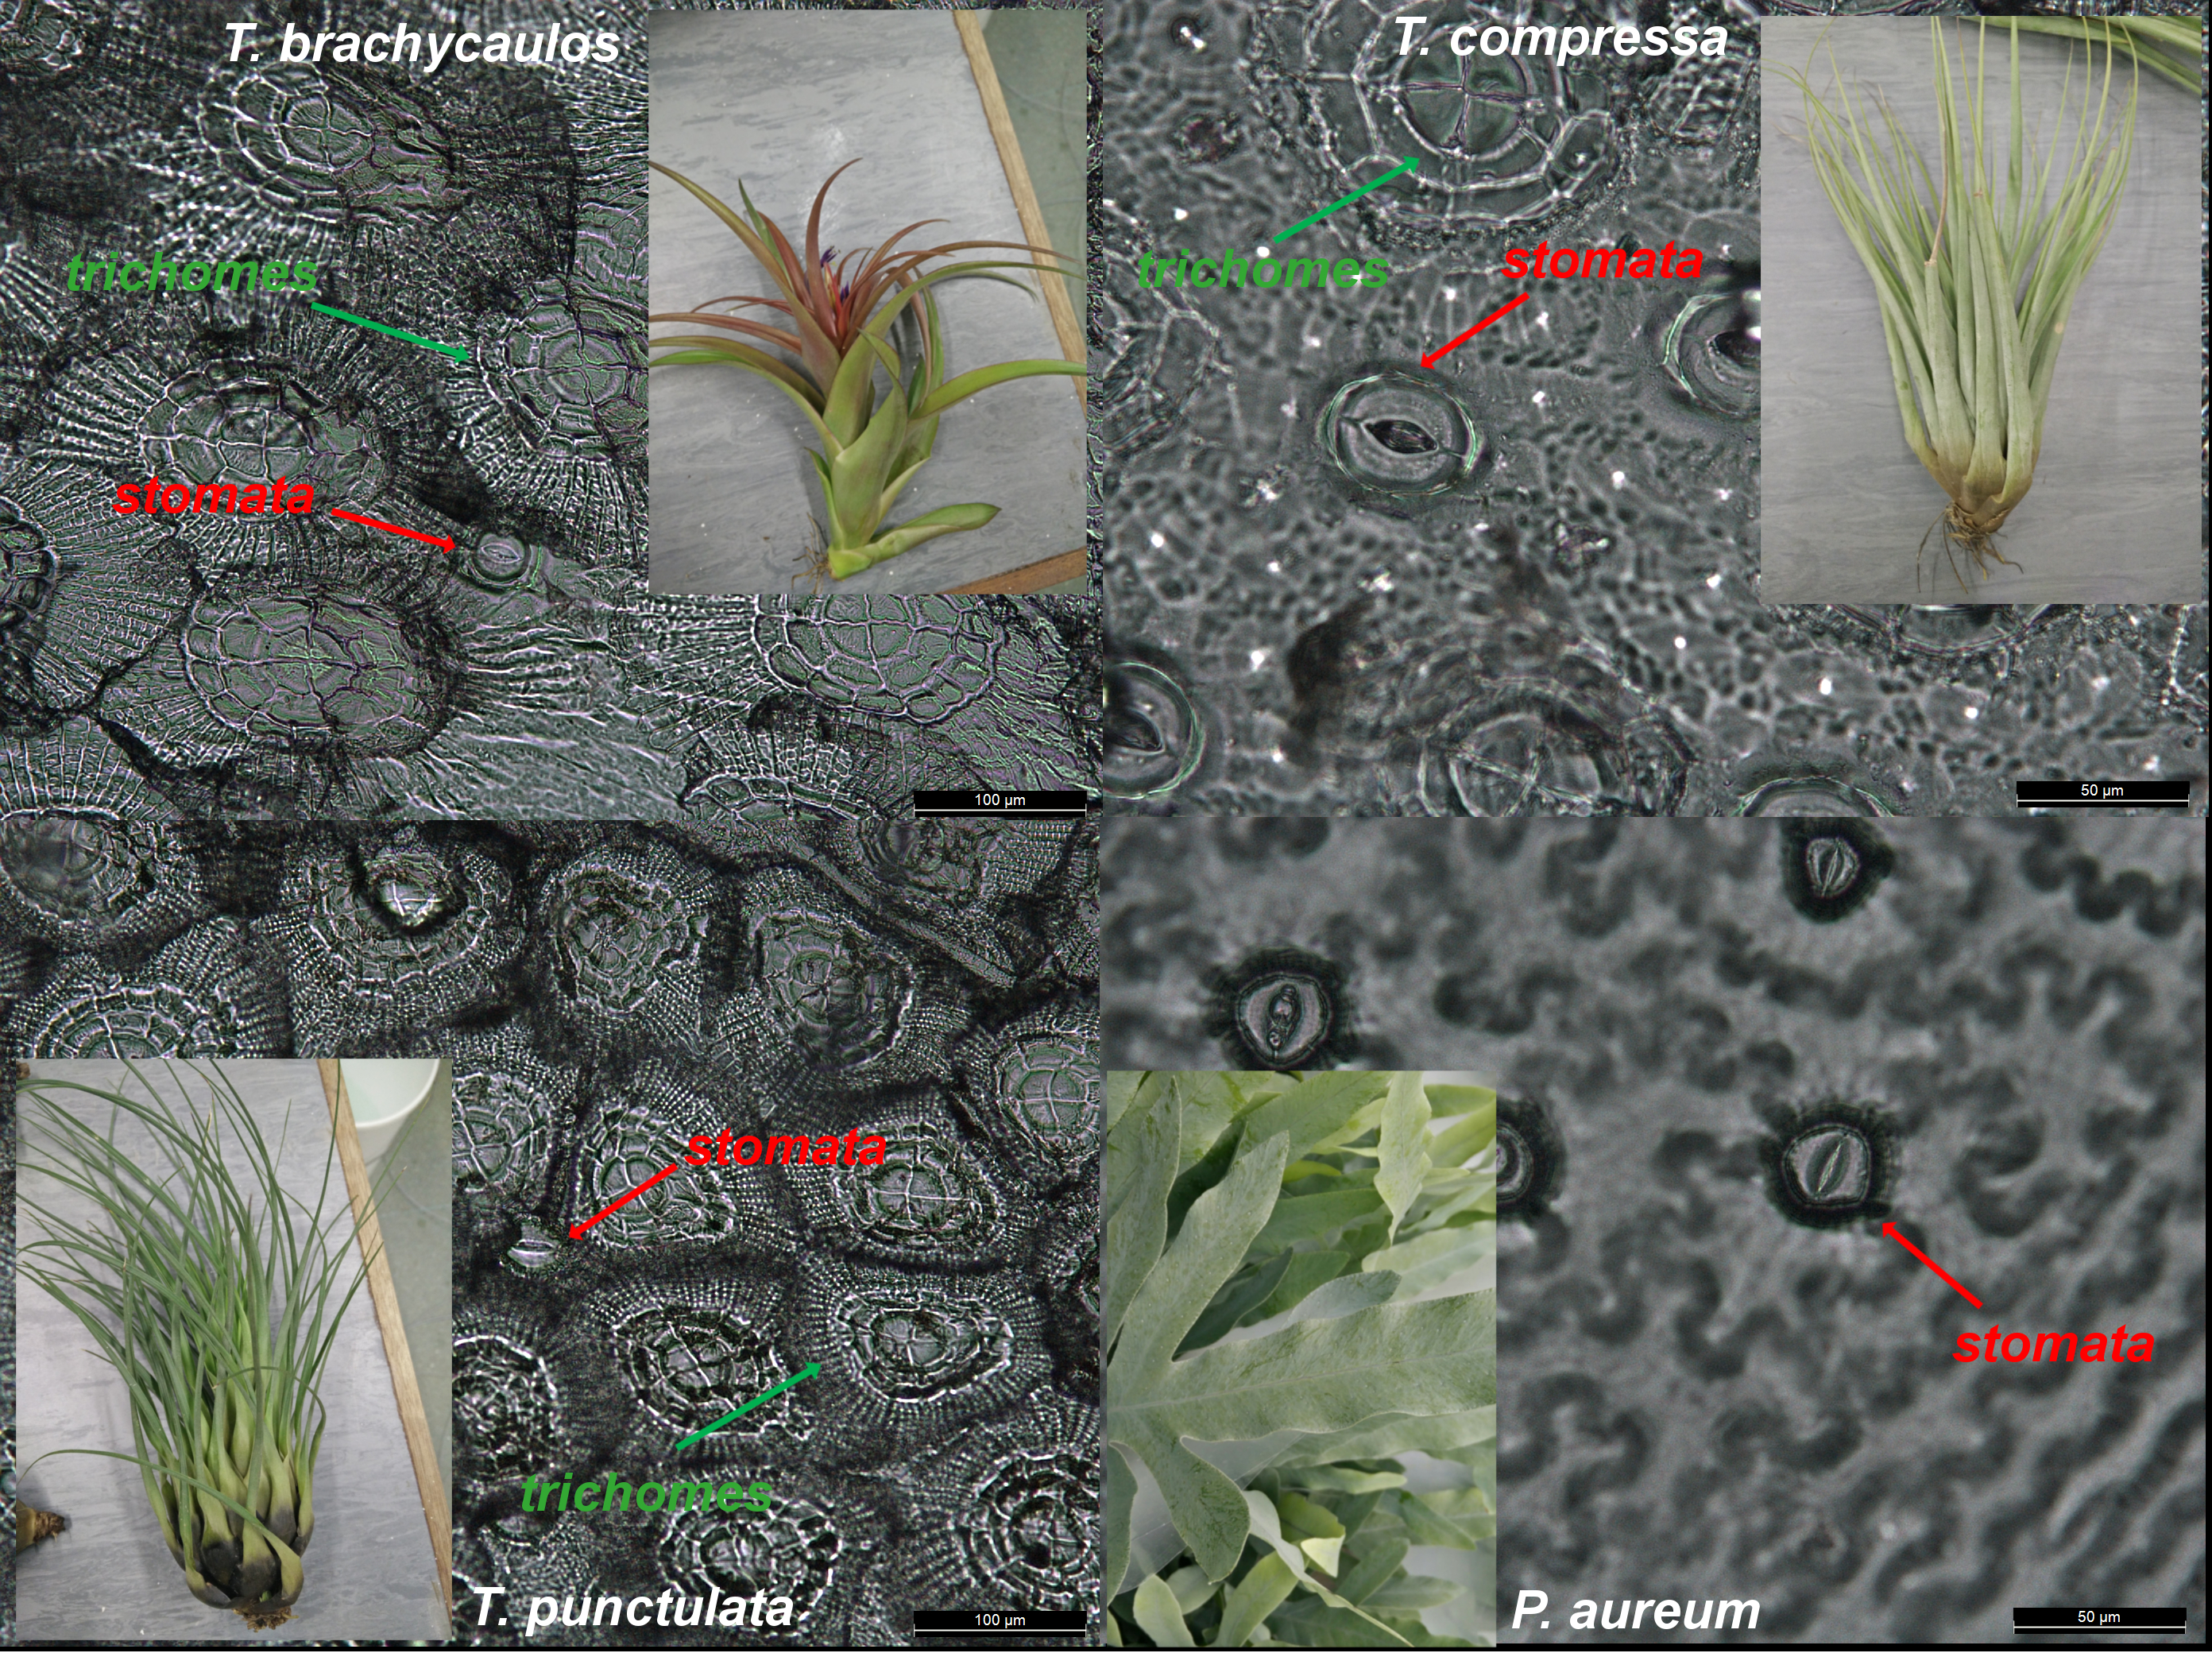 Epidermal leaf impressions of three epiphytic bromeliad and one fern showing the stomatal pores and leaf trichomes (hairs).